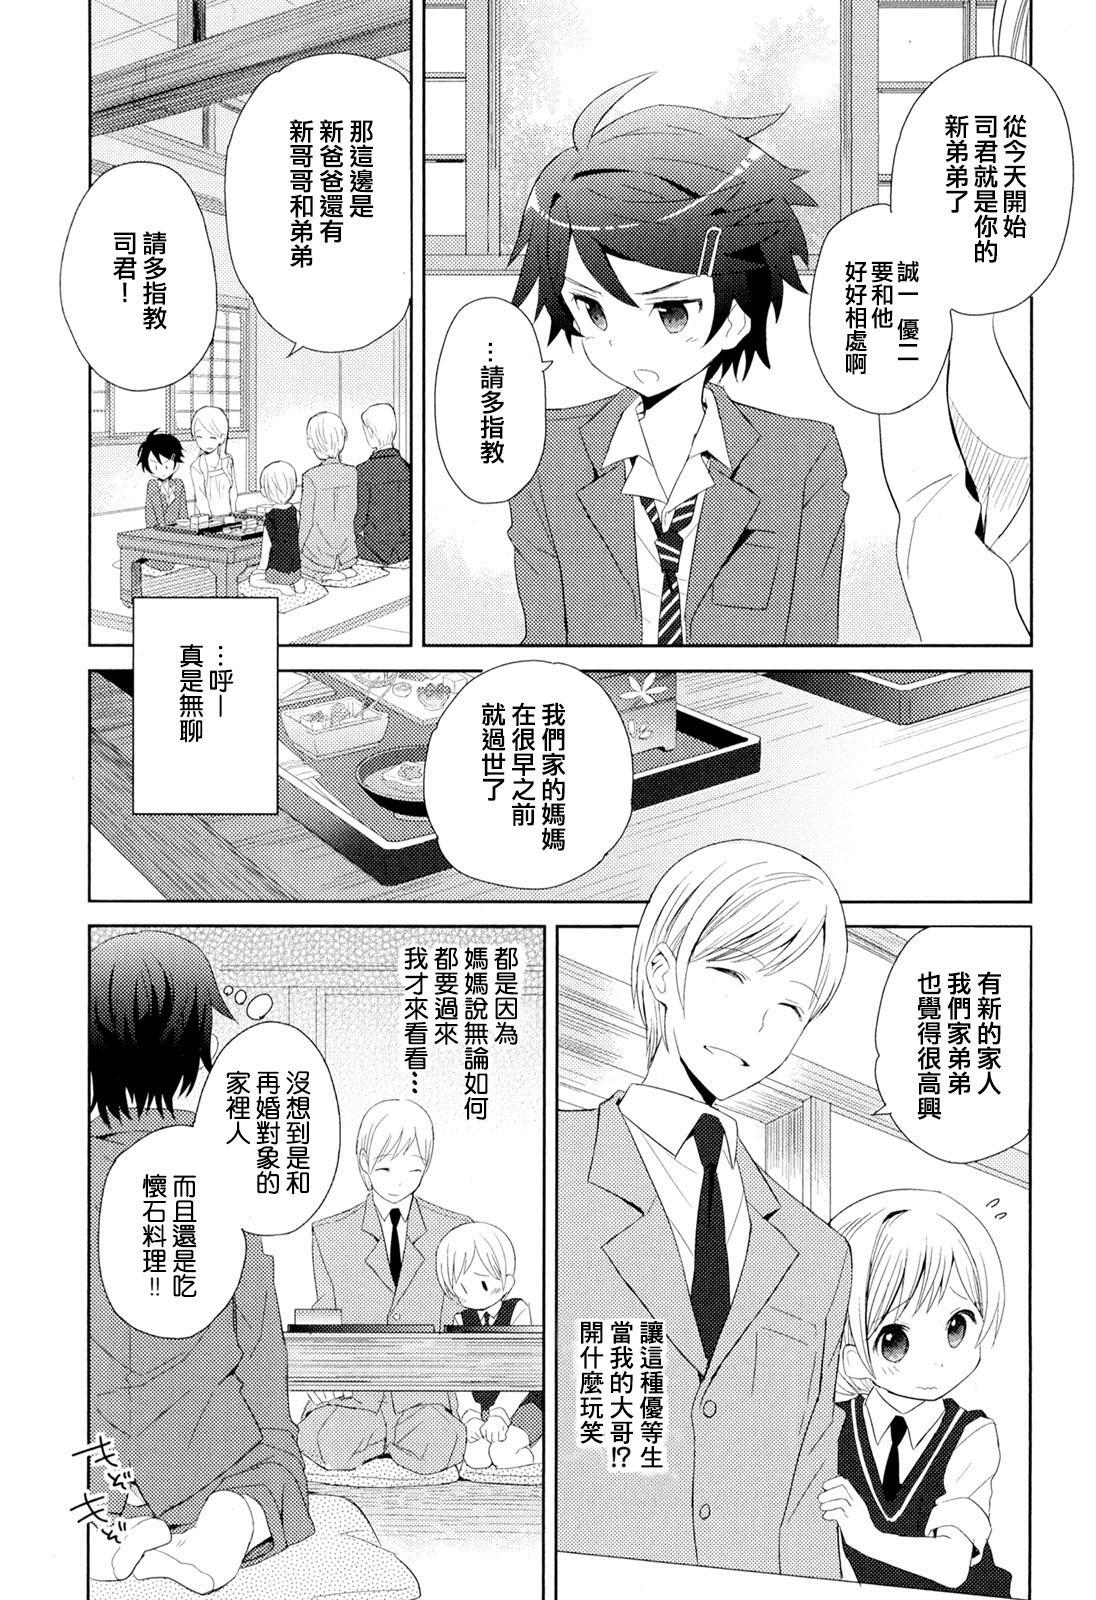 Mamada [Sakaki Tsui] Otouto Shikake no Honey Trap - Lovely Younger Brother Honey Trap Ch. 1-2 [Chinese] [萌控漢化組] Cum Swallowing - Page 5